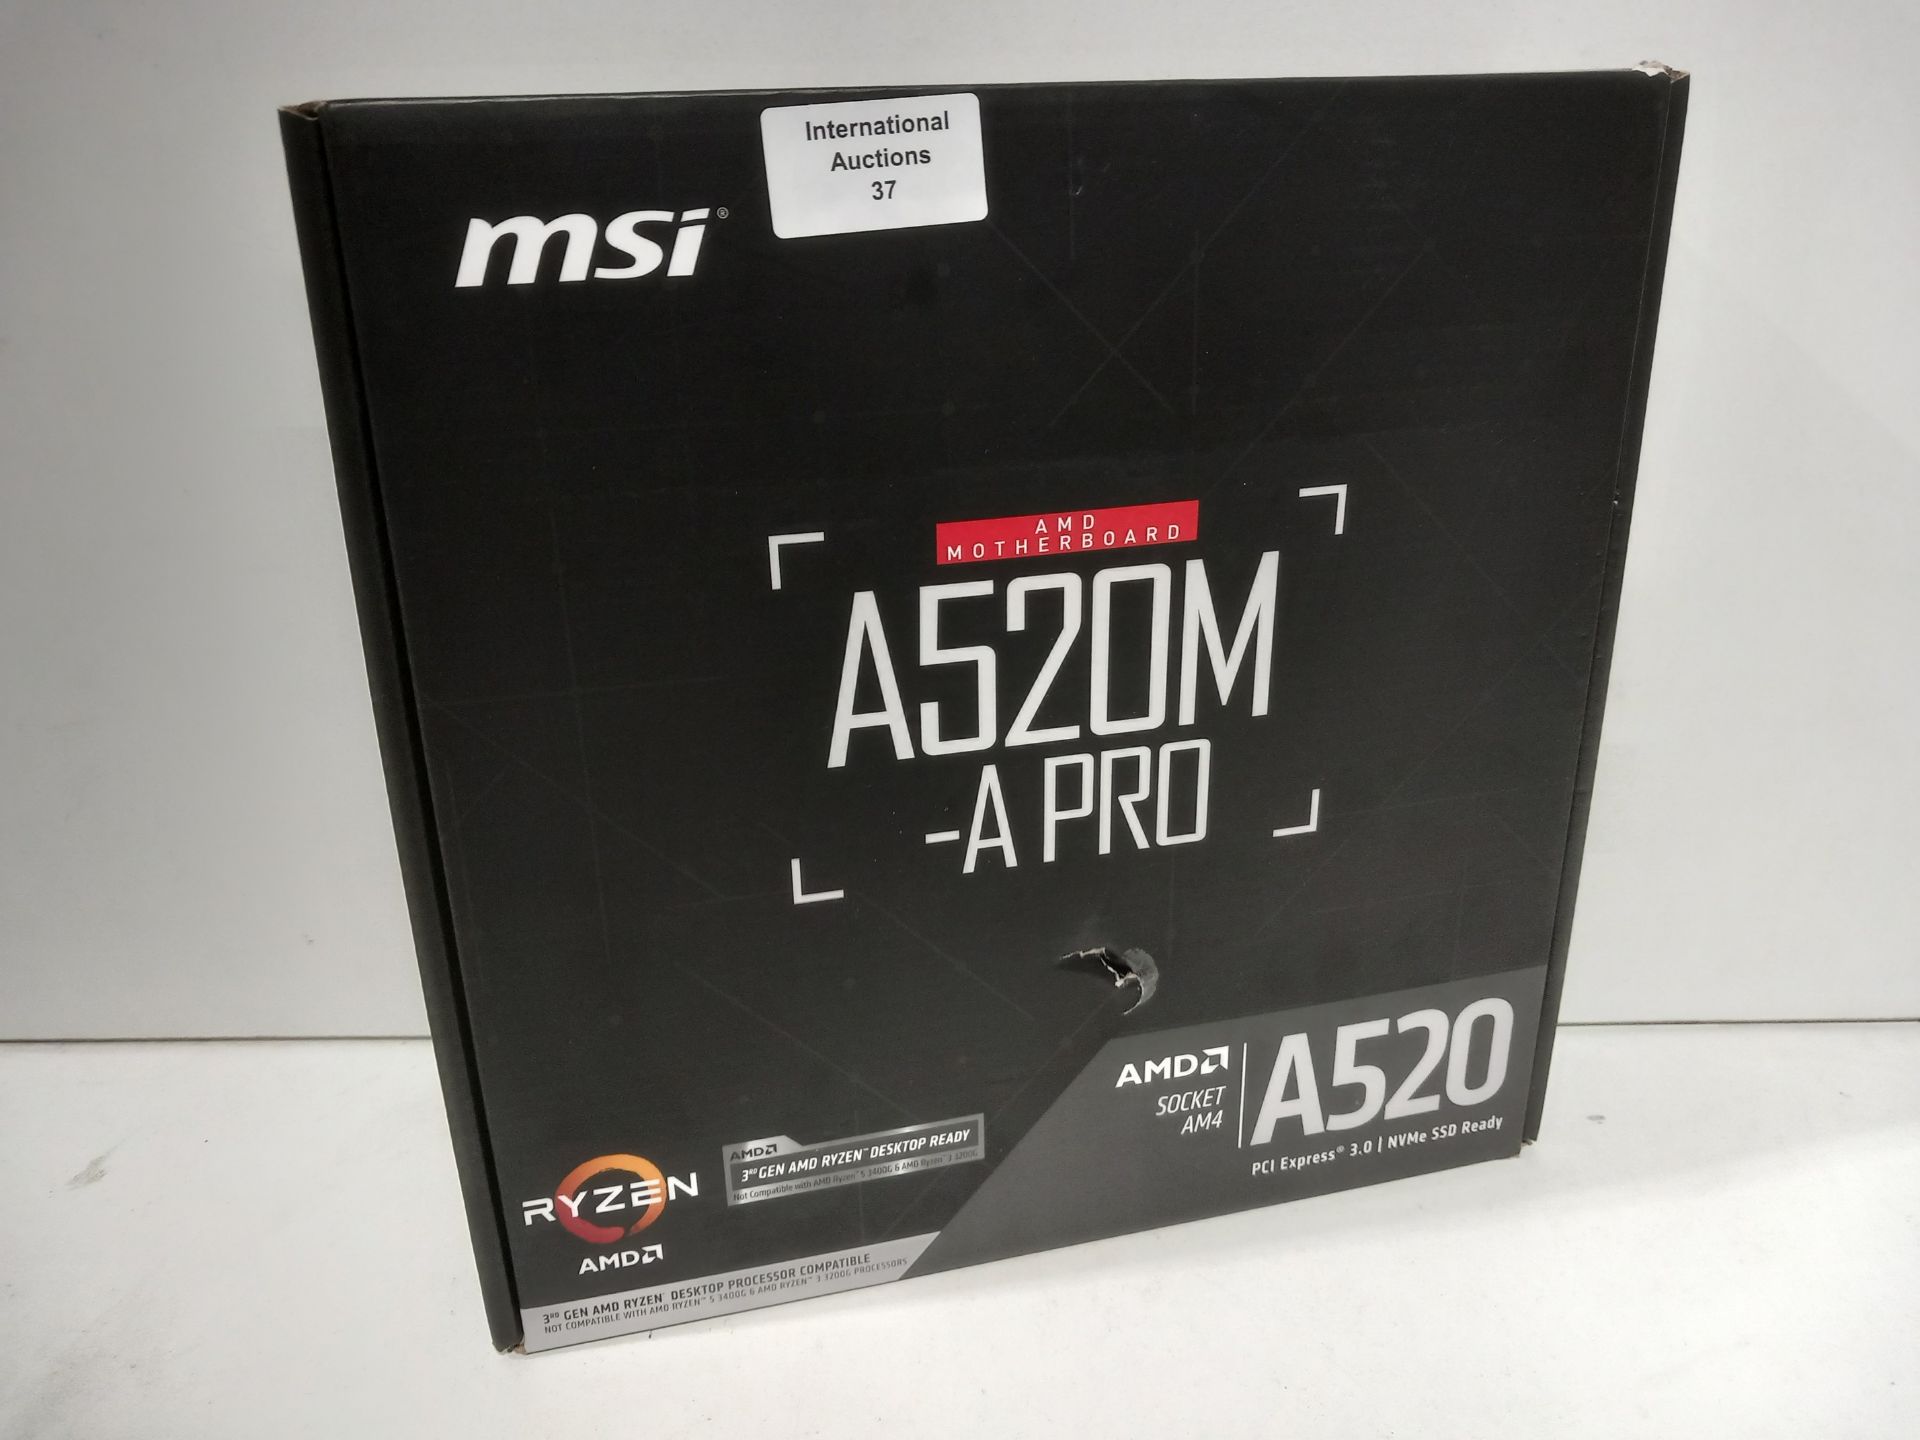 RRP £49.69 MSI A520M-A PRO Motherboard mATX - Supports AMD Ryzen 3rd Gen Processors - Image 2 of 2